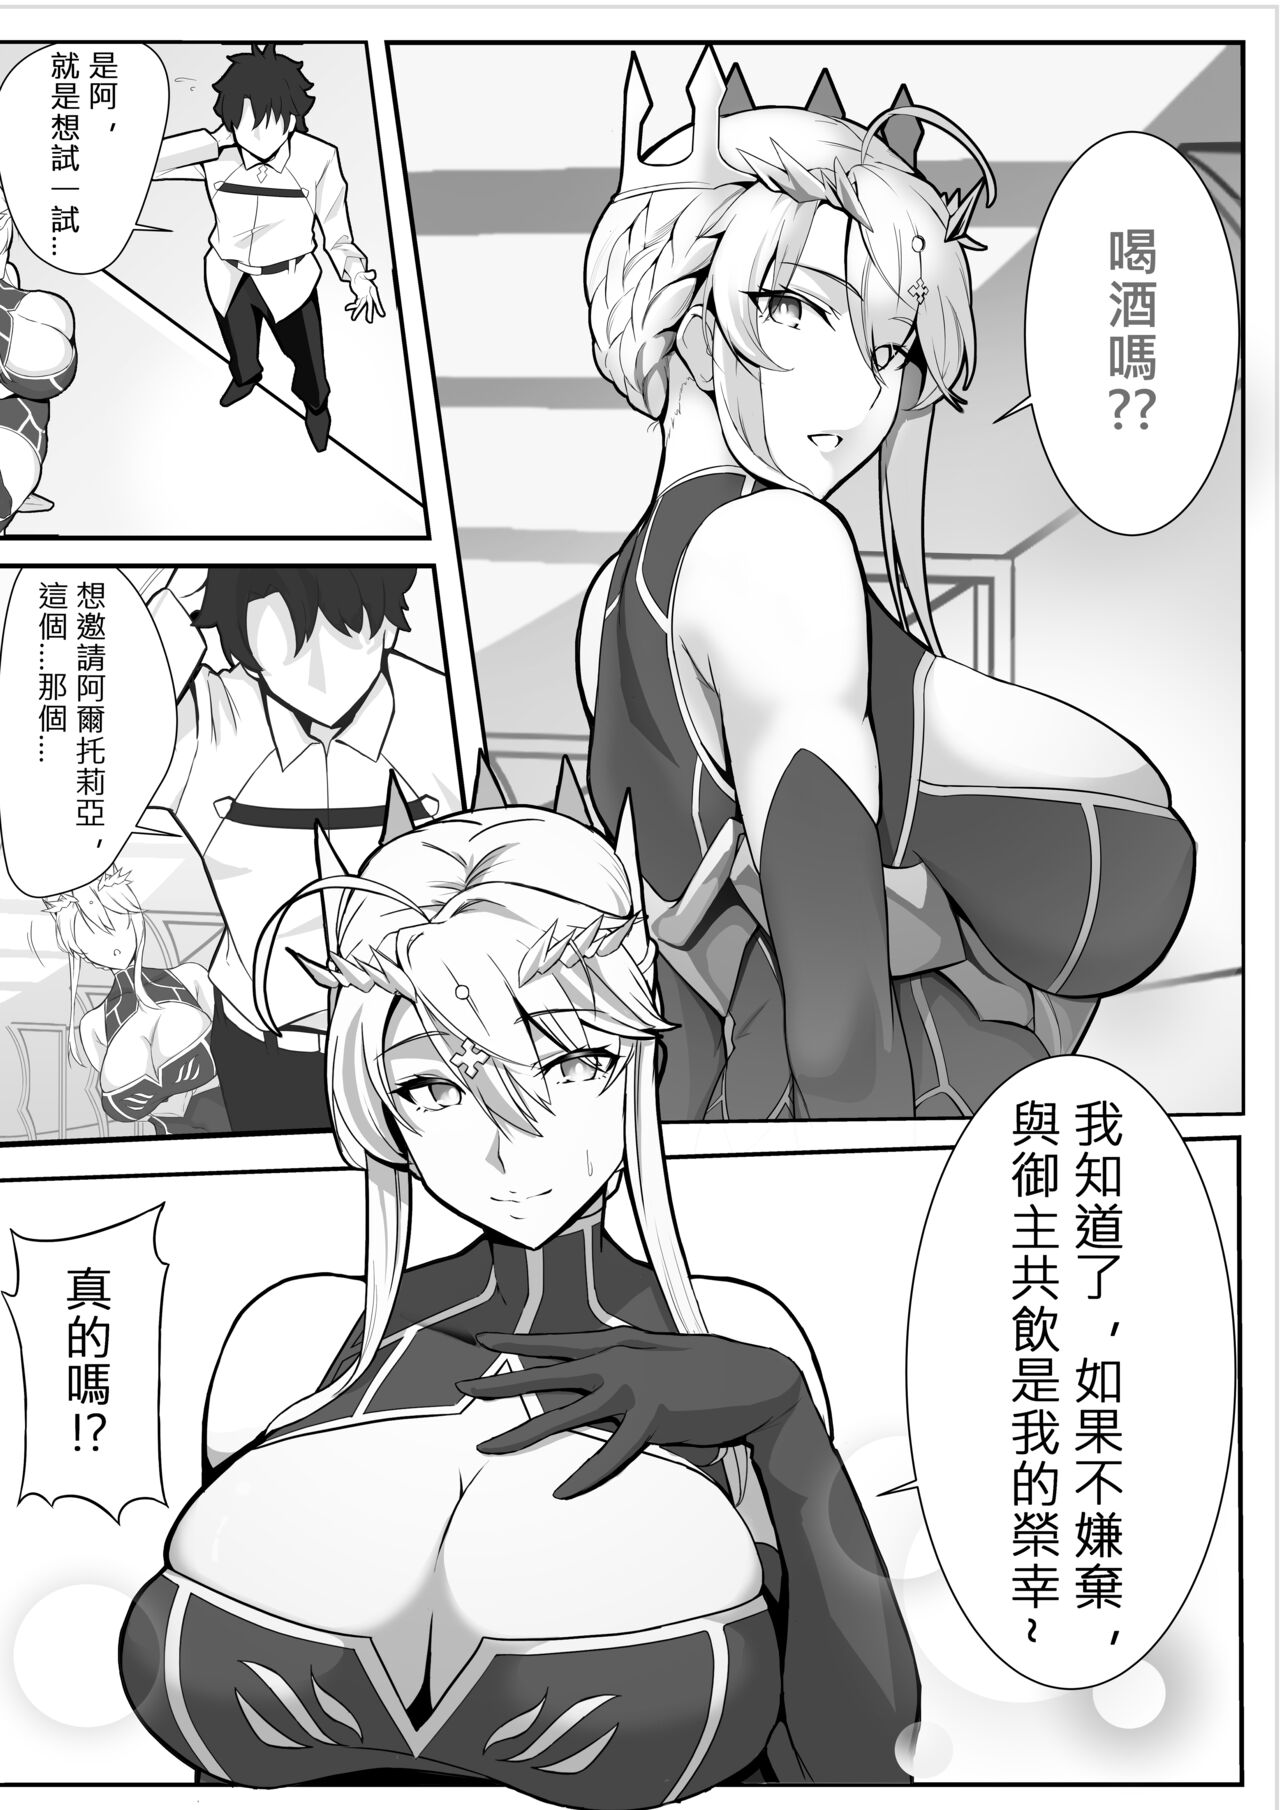 The Secret Communication of the King of Knights [シキ] 騎士王的秘密交流 (Fate/Grand Order) [中国語]